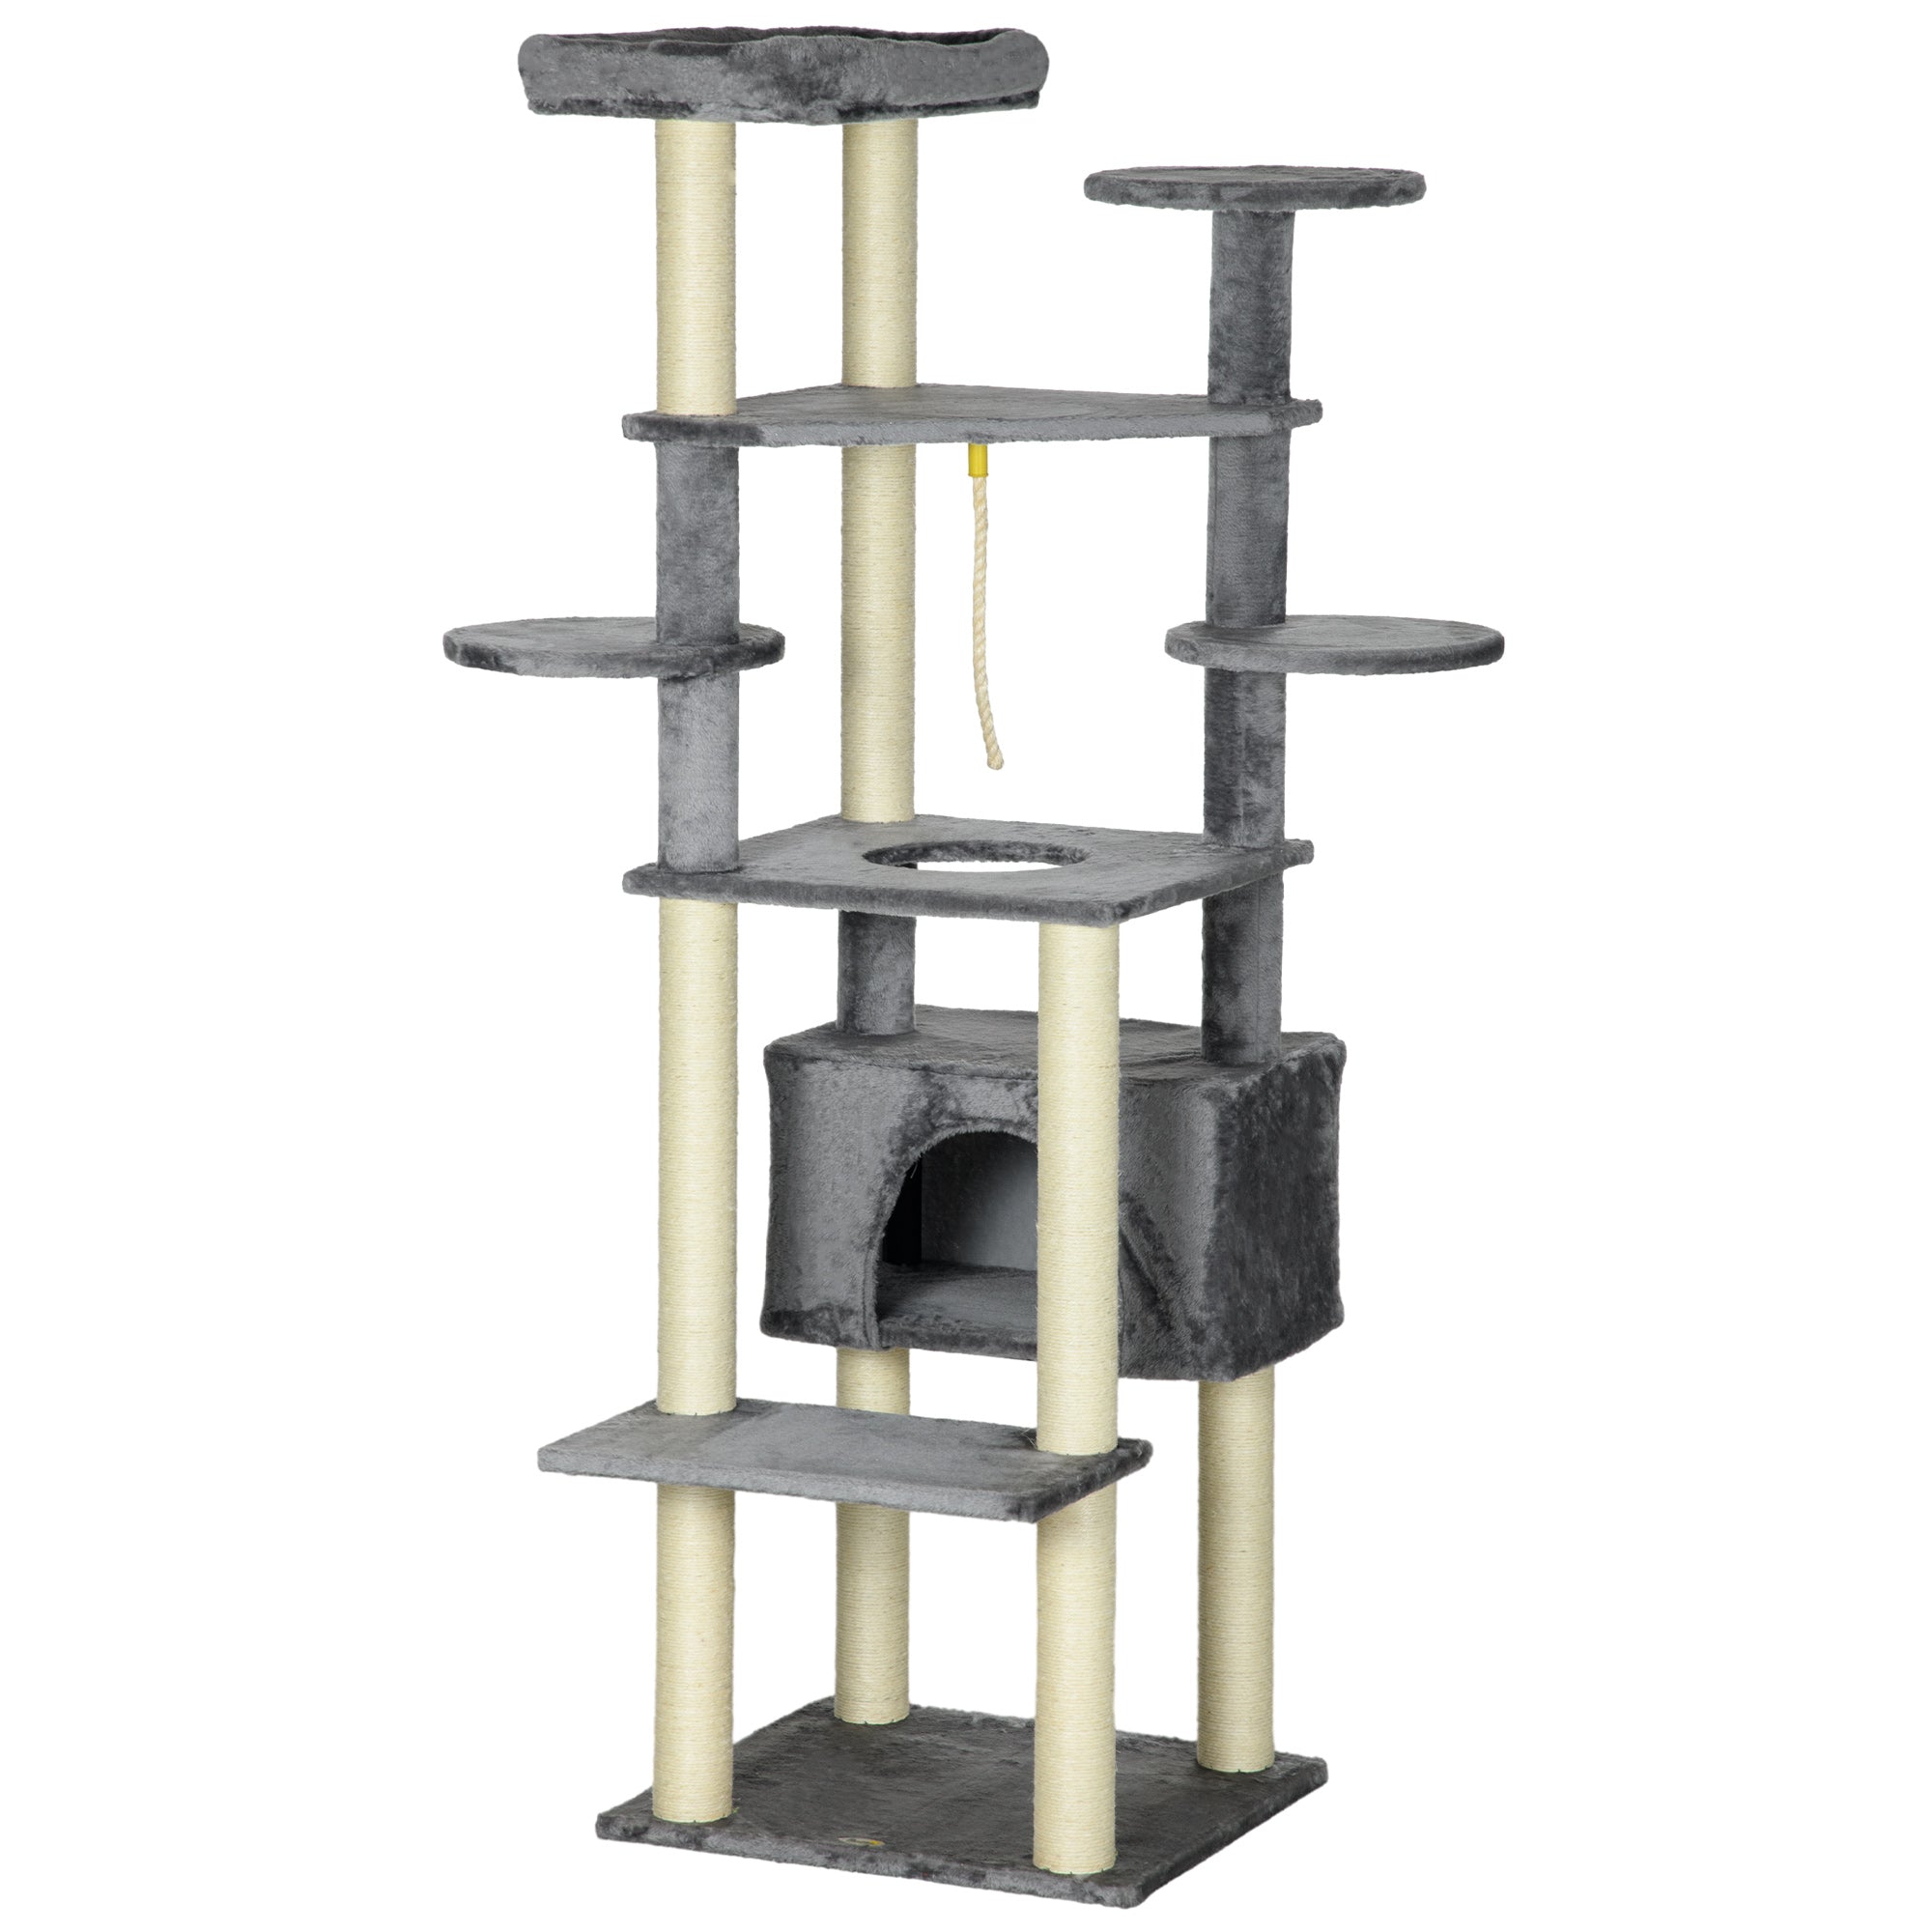 184cm Cat Tree for Indoor Cats, Multi-level Kitten Climbing Tower with Scratching Posts, Cat Bed, Condo, Perches, Hanging Play Rope, Grey-0